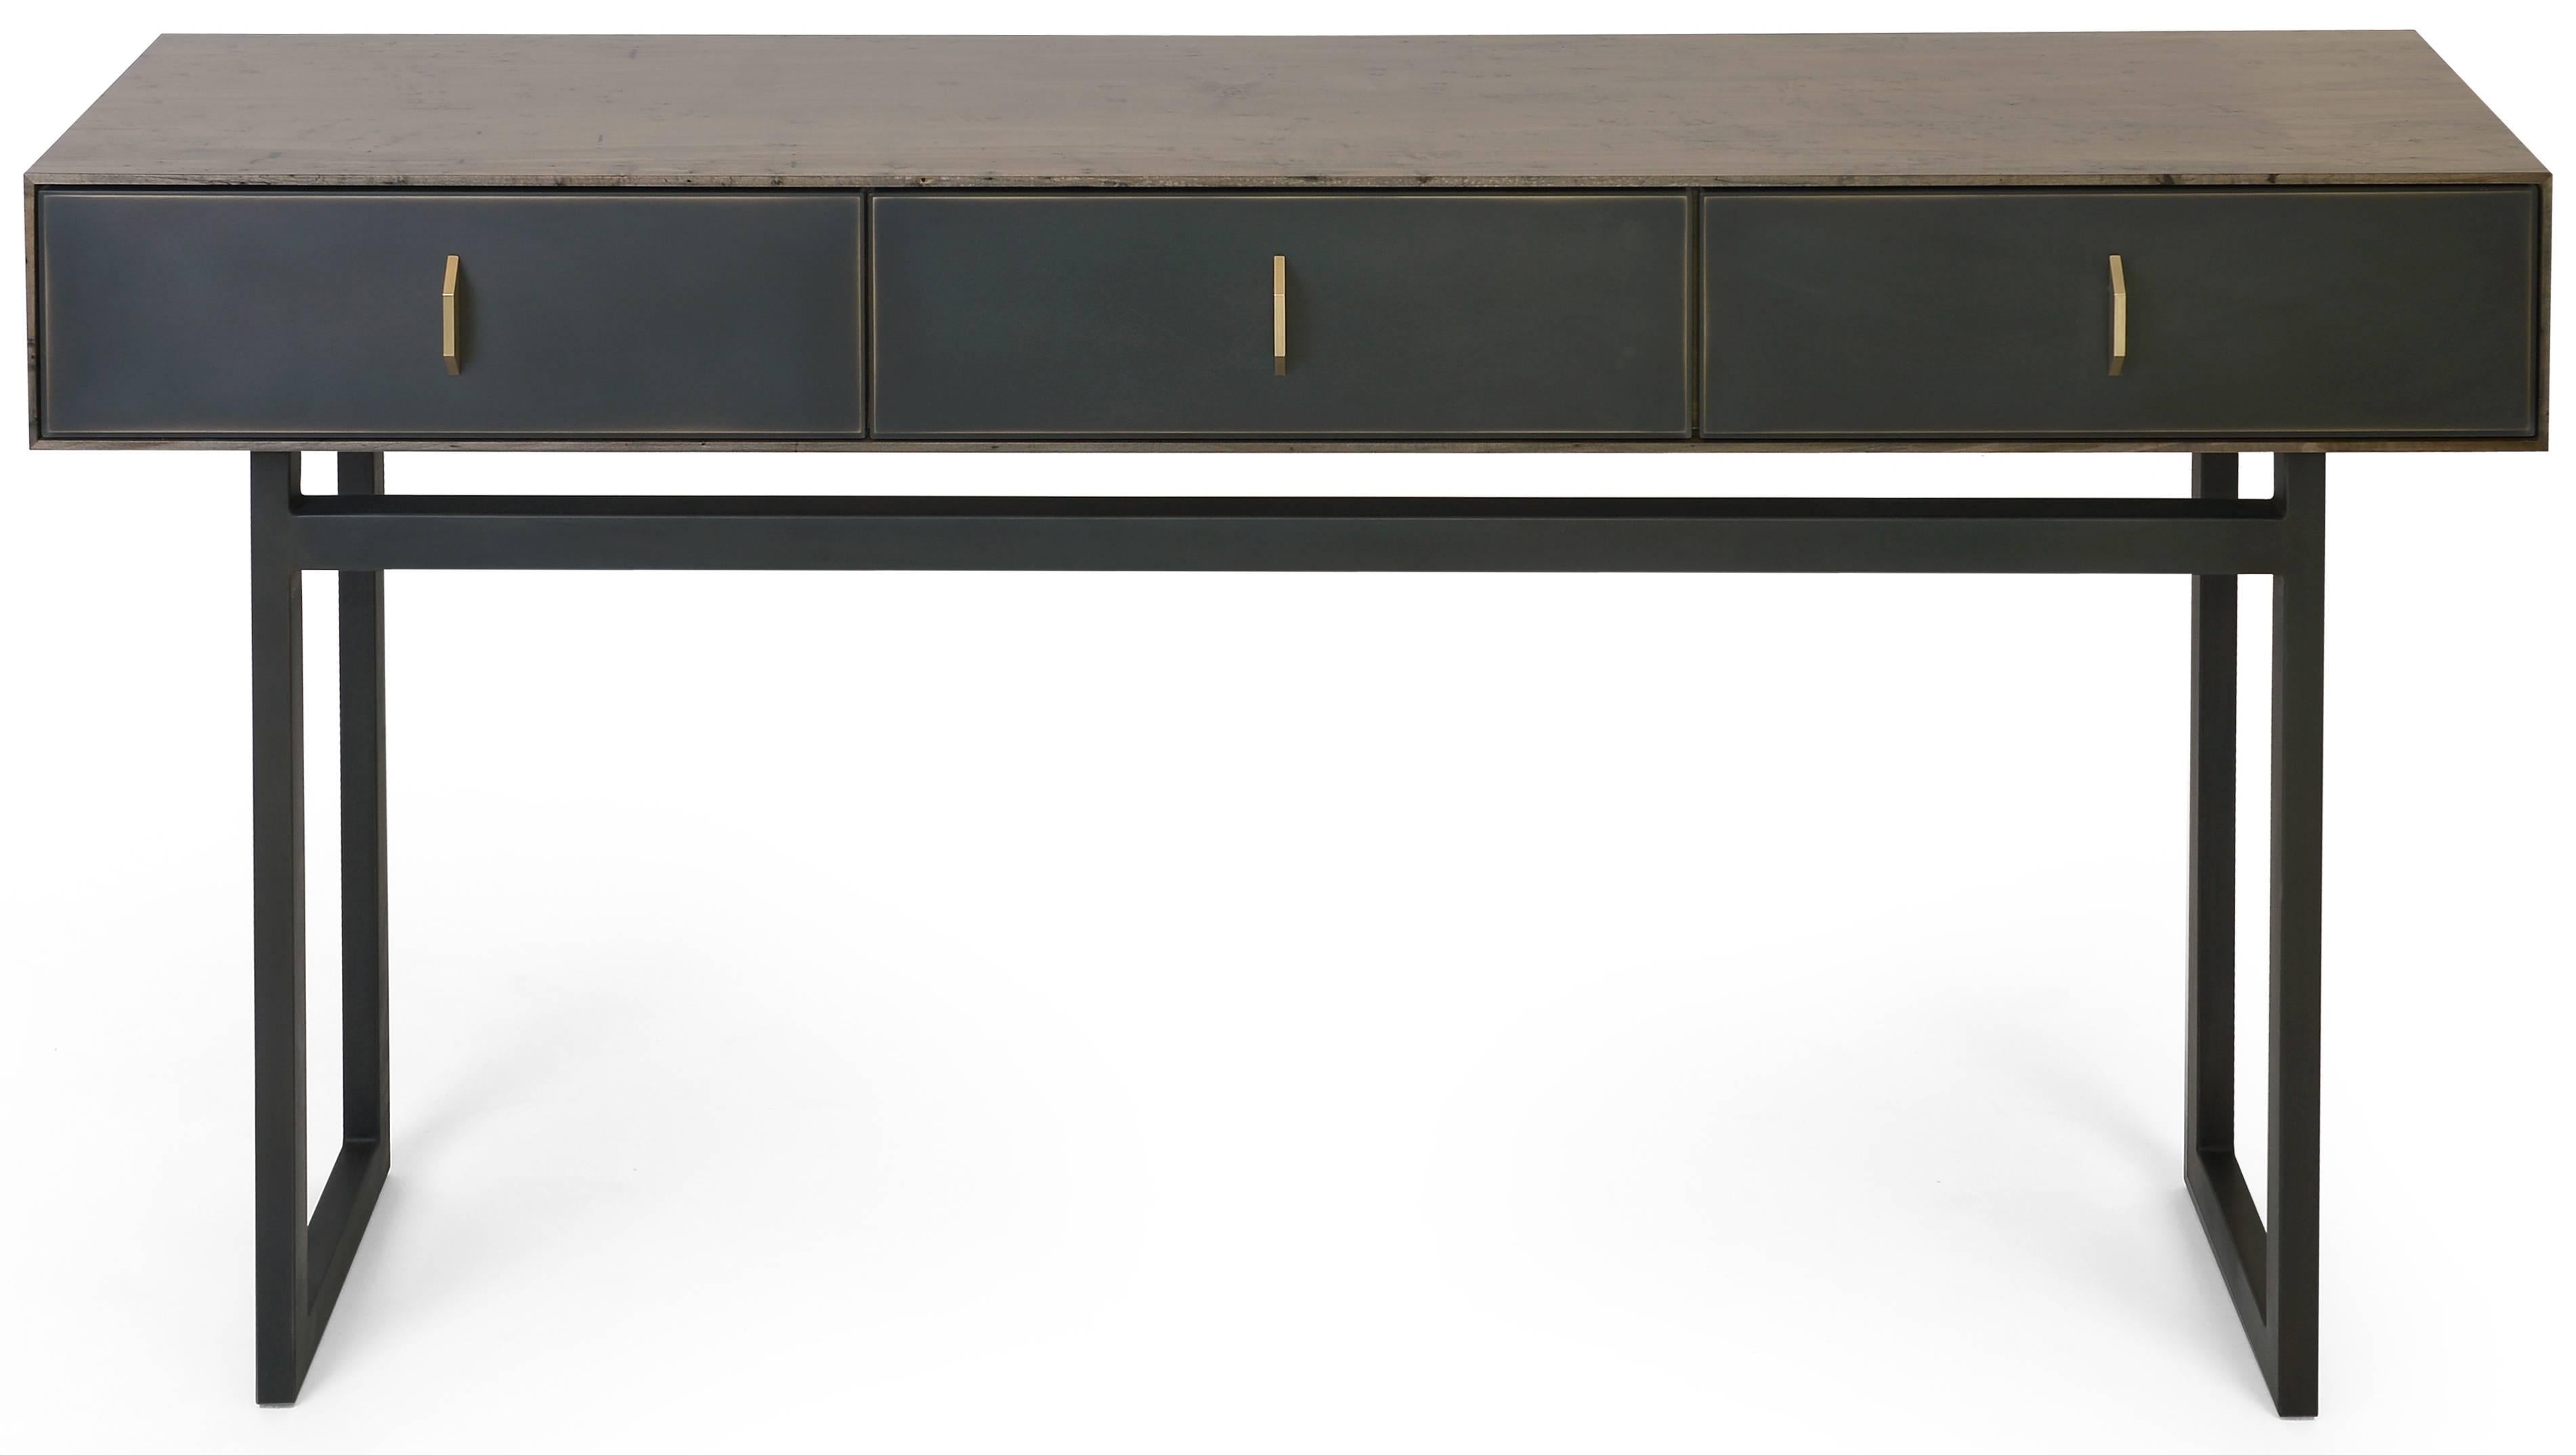 The harmonious mix of materials enhances the beauty of this gotham console. The console features rich oxidized Ambrosia maple wood, a blackened steel frame, three blackened bronze encased in epoxy resin drawers with black leather lining and